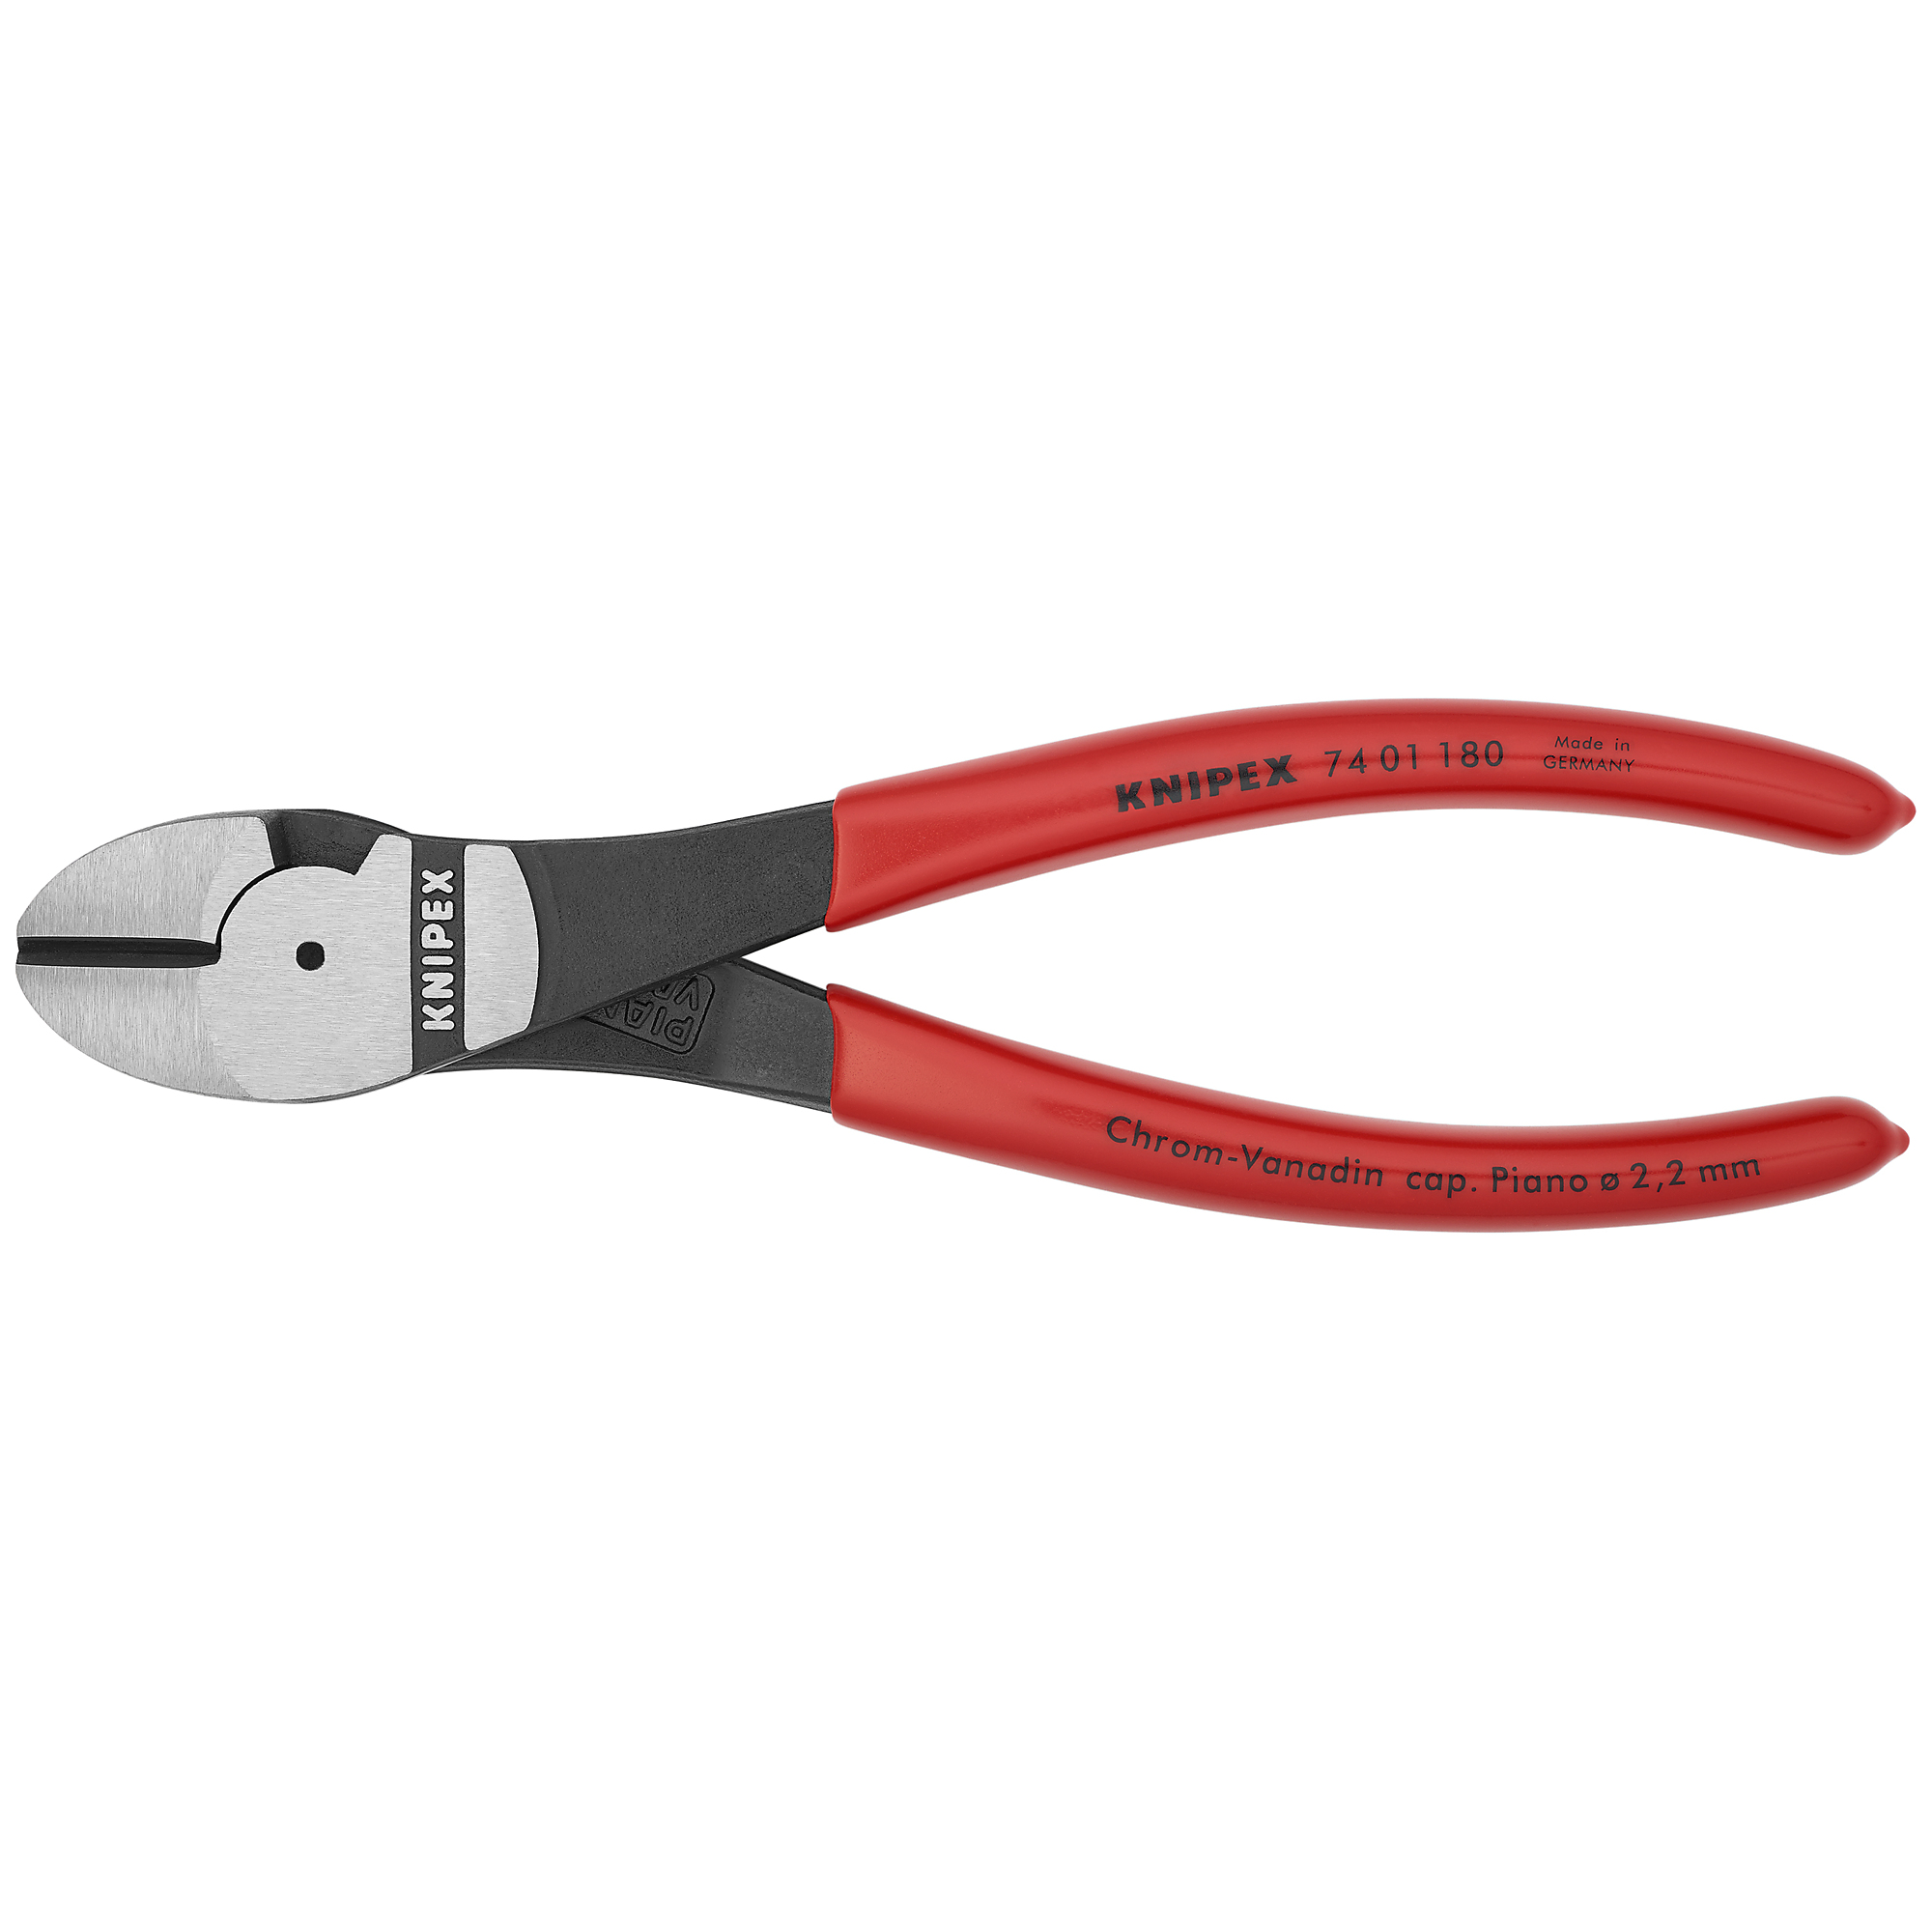 KNIPEX, HL Diagonal Cutters, Plastic coating, Bulk, 7.25Inch, Pieces (qty.) 1 Material Steel, Jaw Capacity 0.156 in, Model 74 01 180